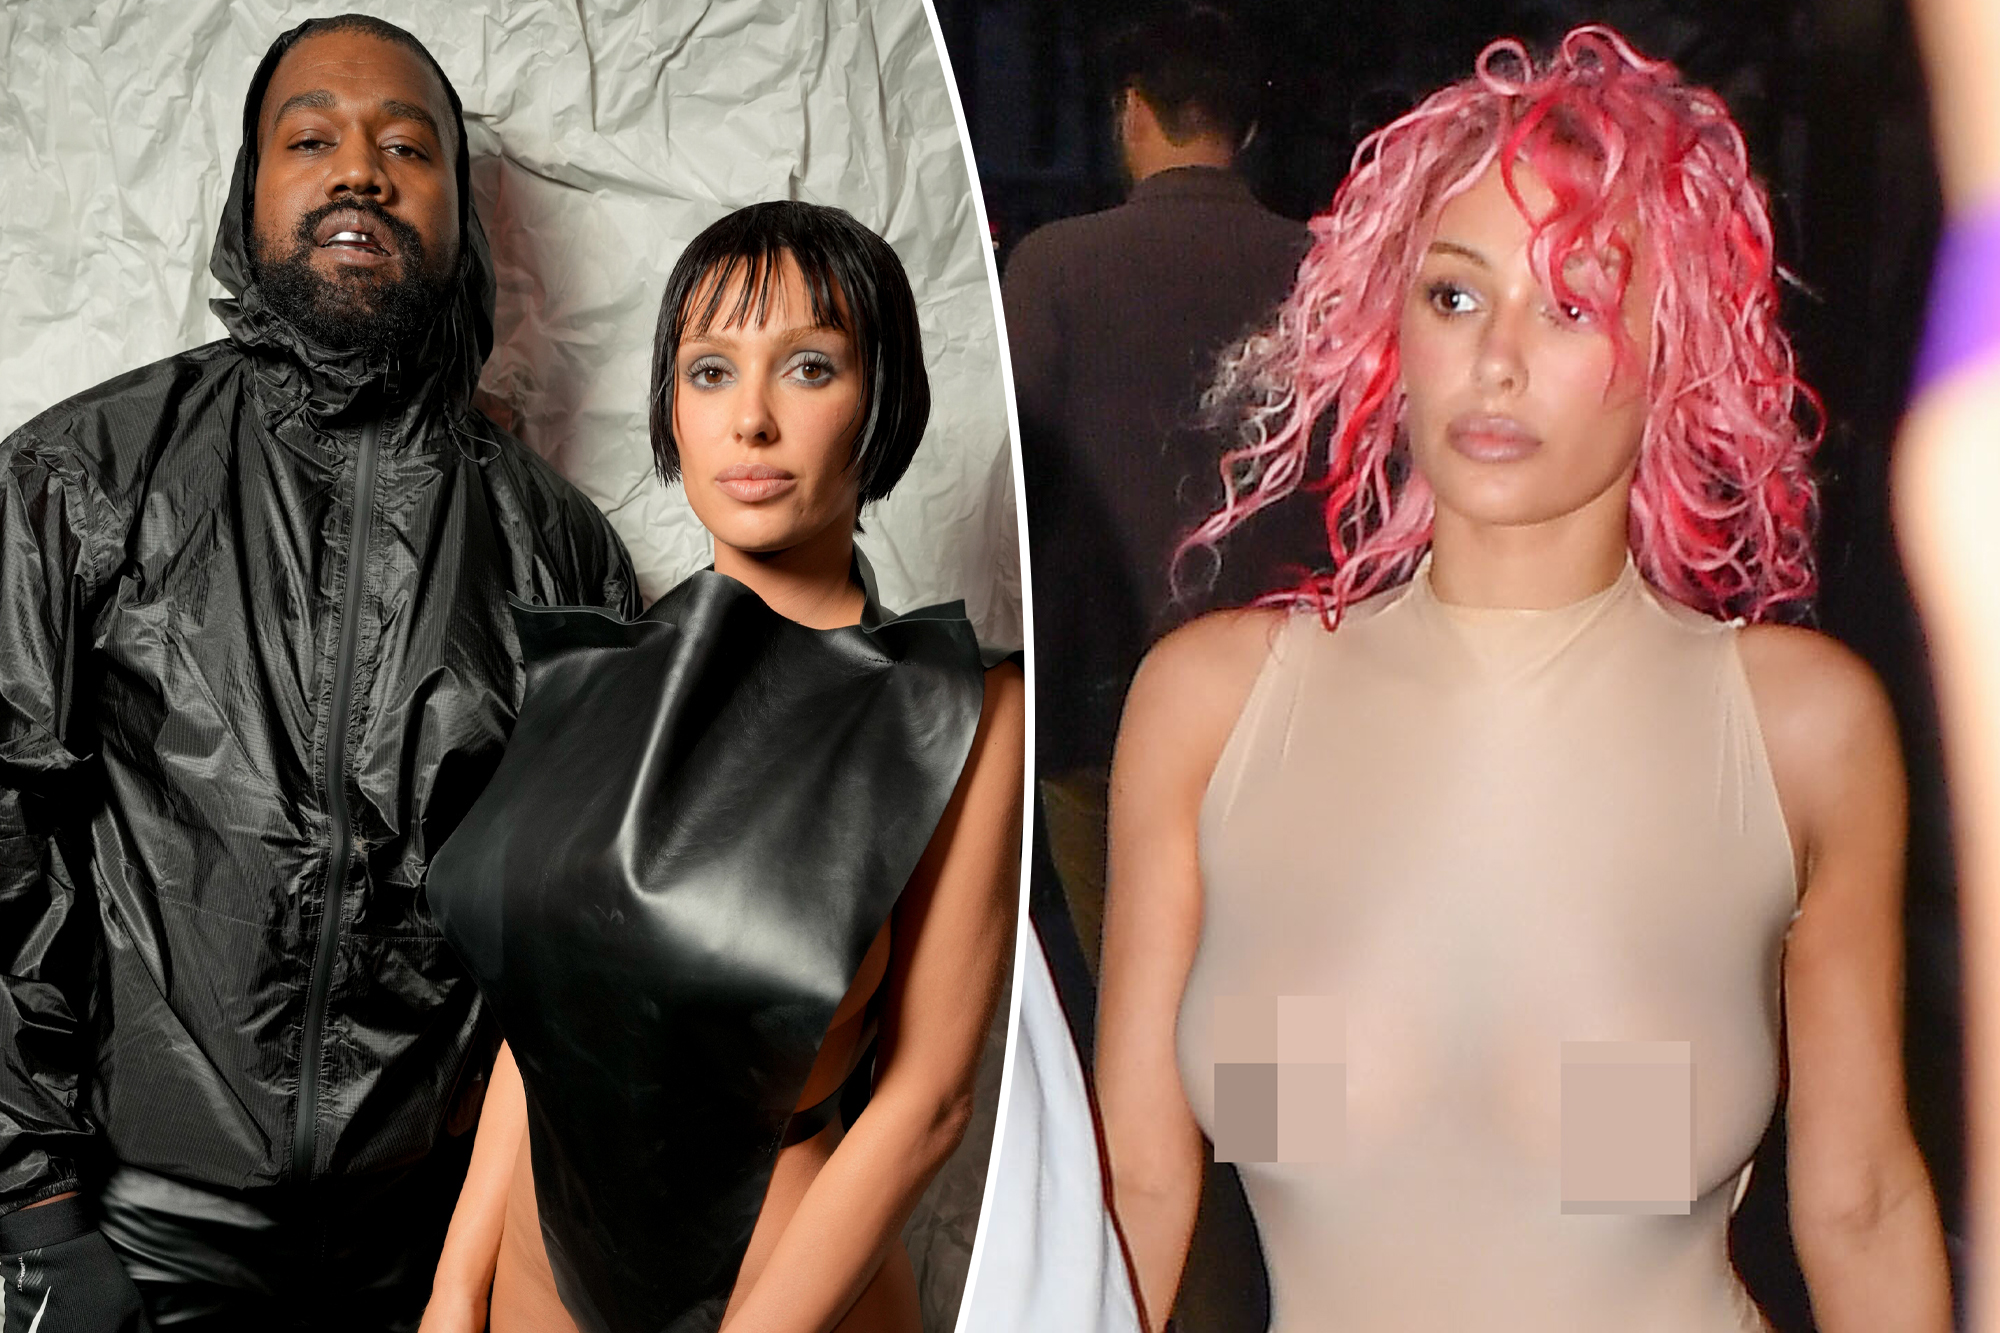 Kanye West's Wife Accused of Sending X-Rated Content to Yeezy Staffers in Shocking Lawsuit